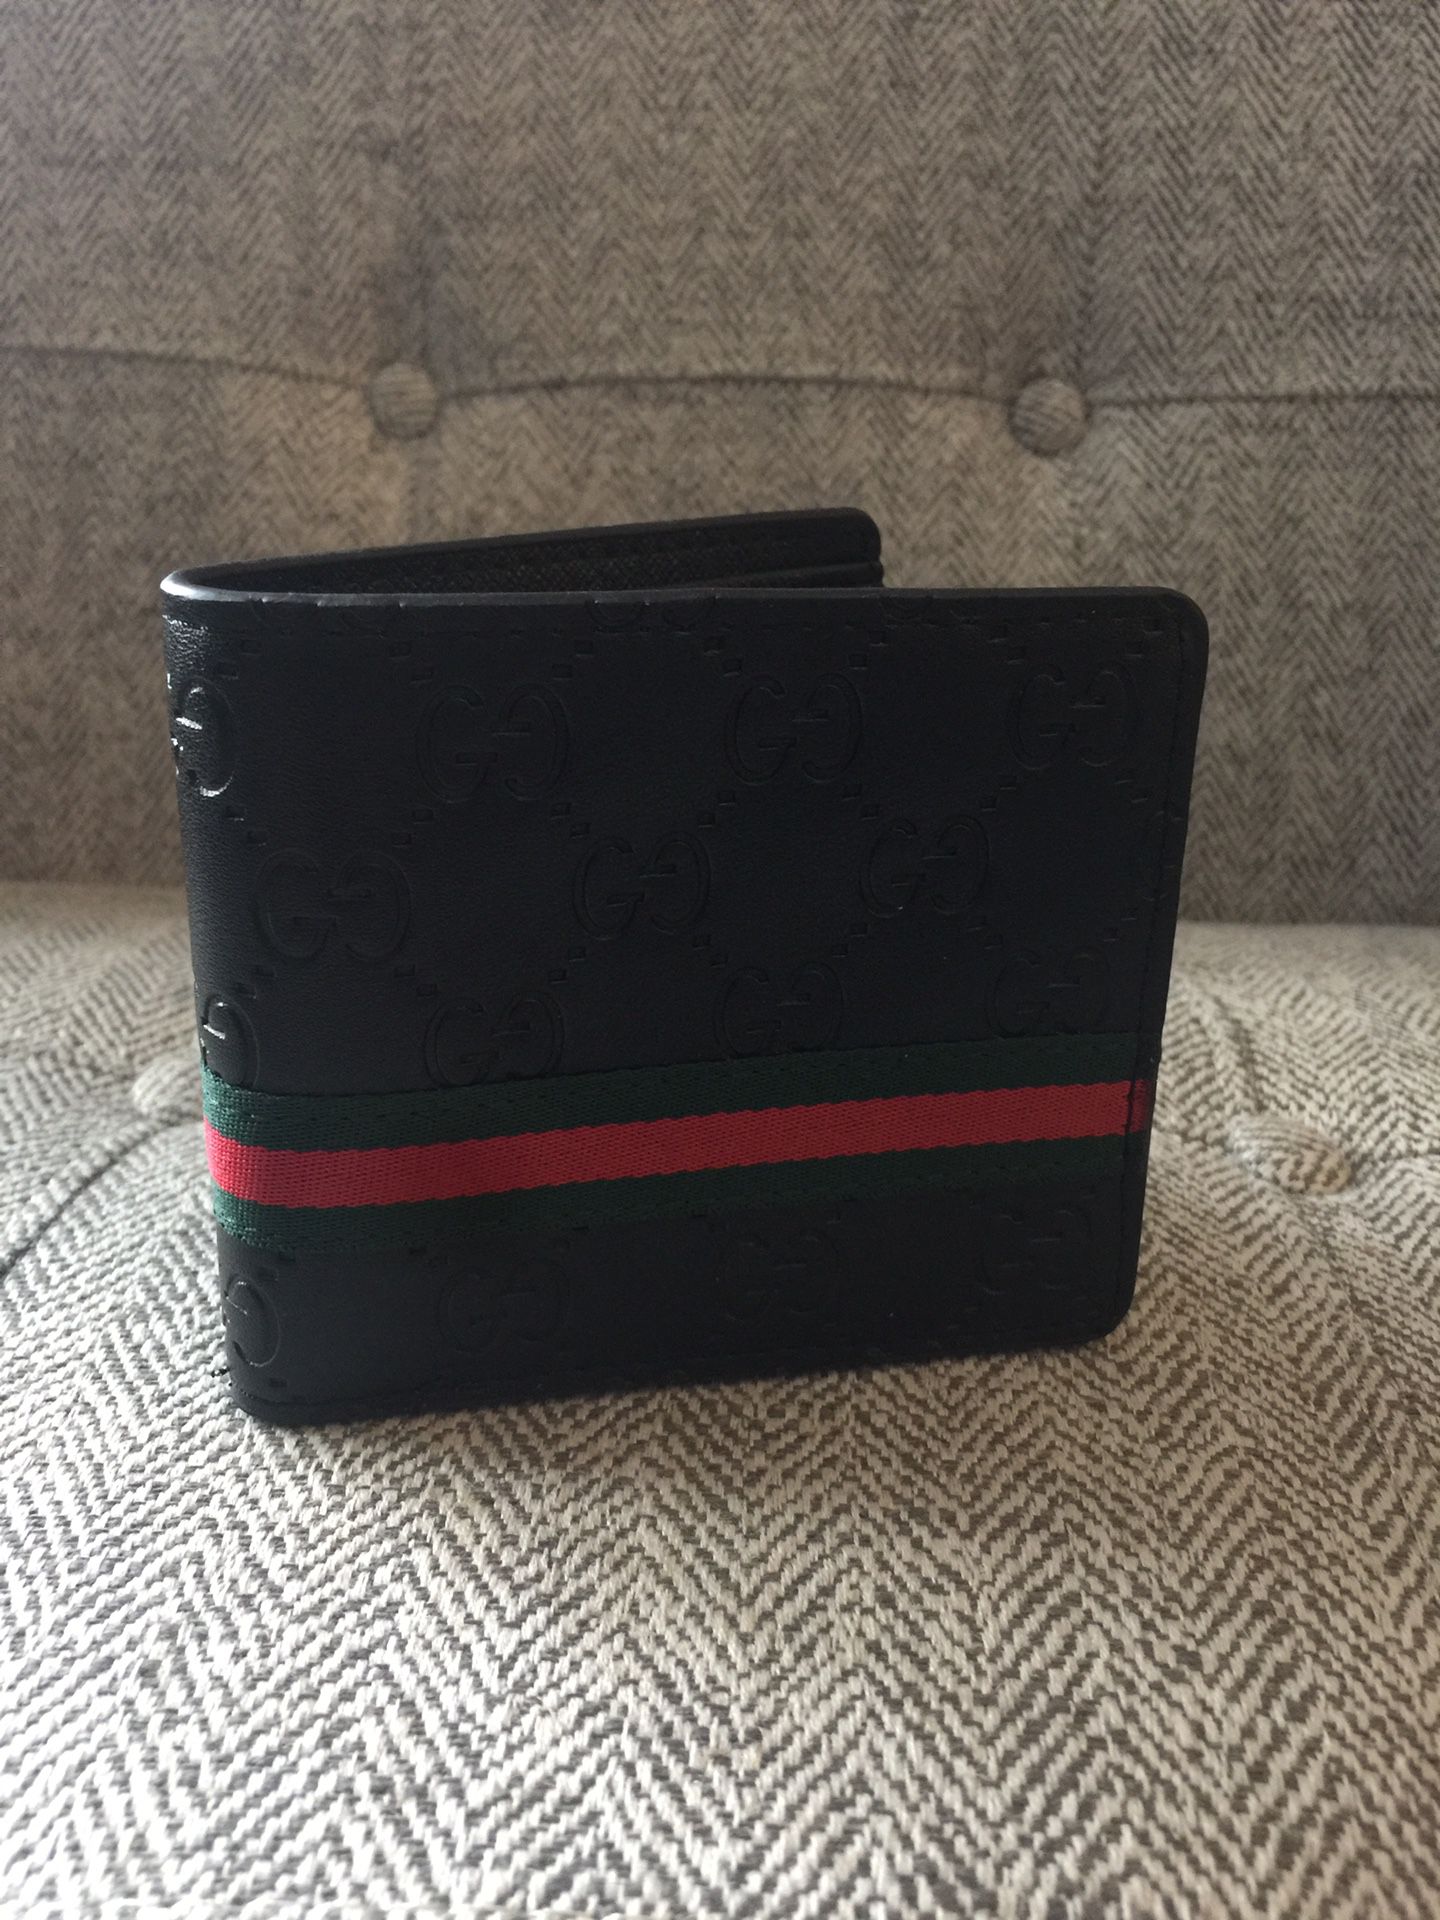 Men wallet (I don't have the box)